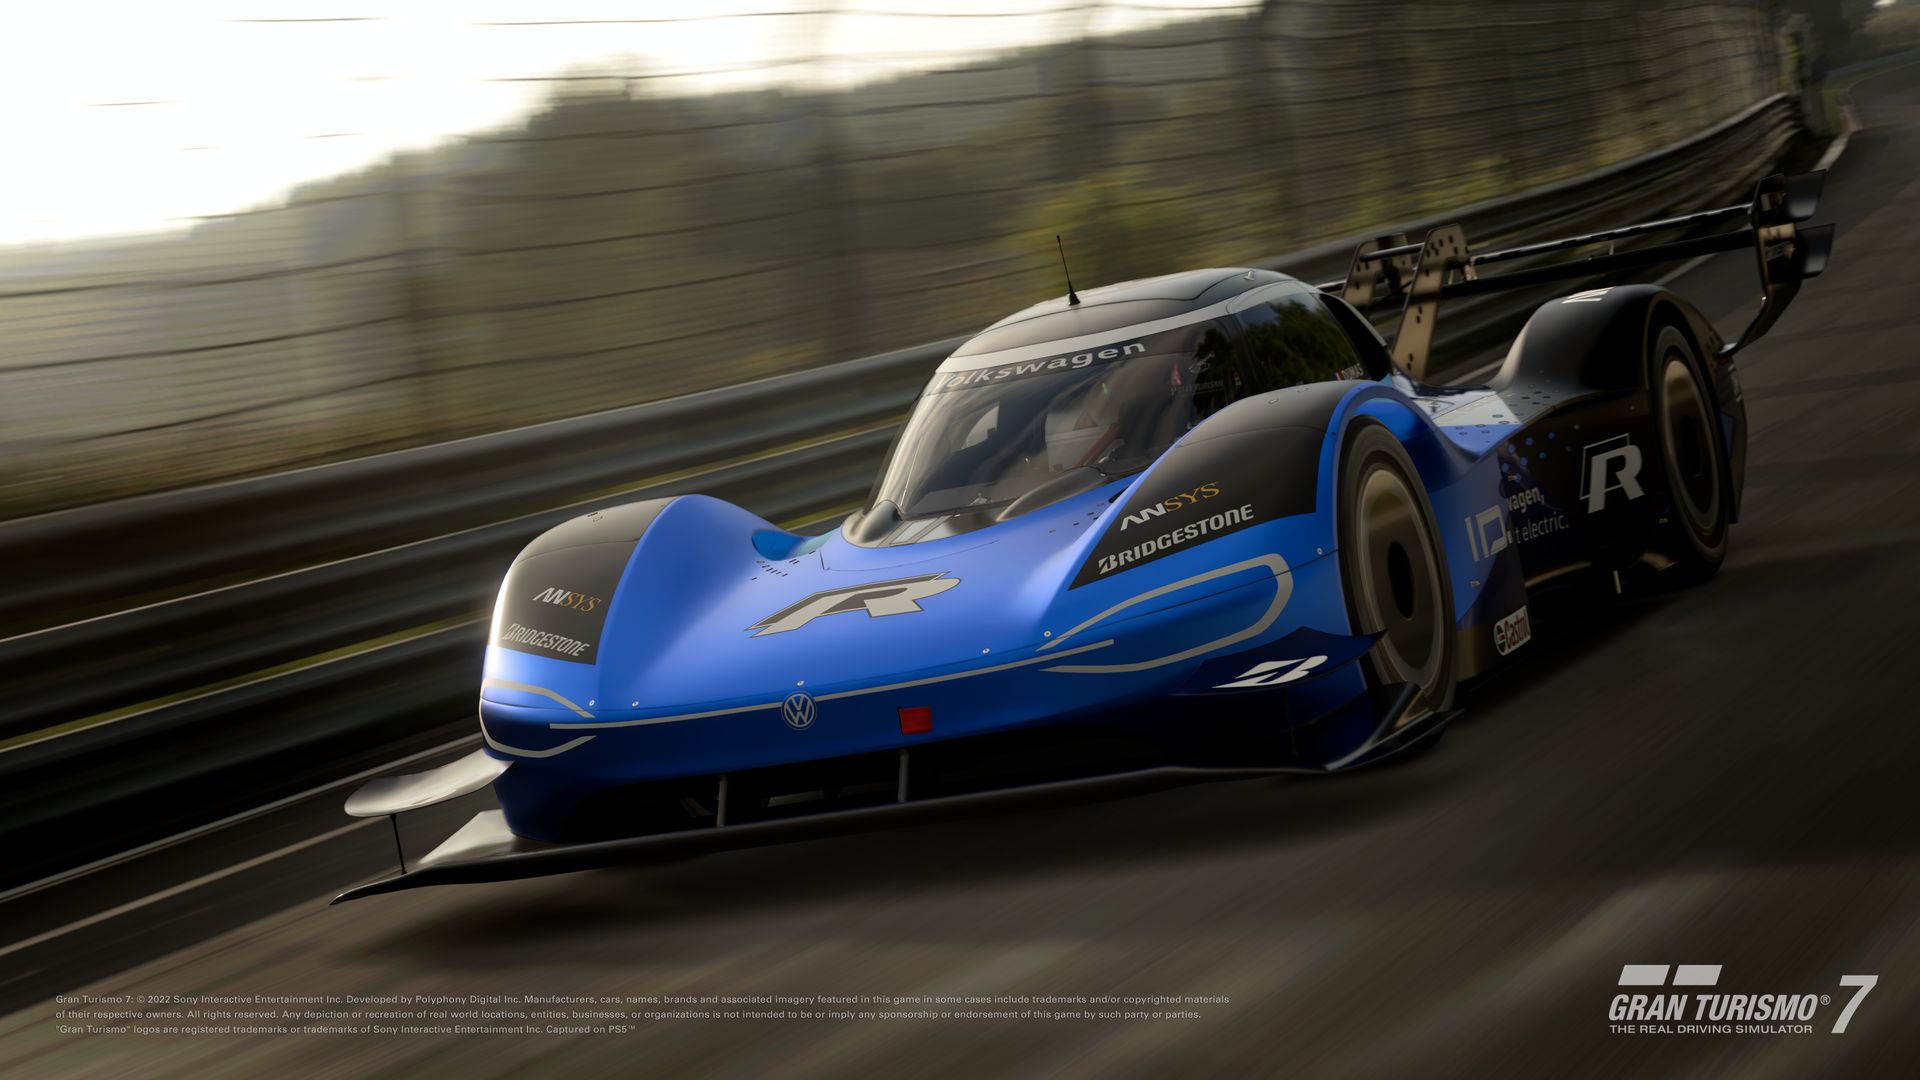 Gran Turismo 7 To Be Released On March 4, 2022, Trailer Looks